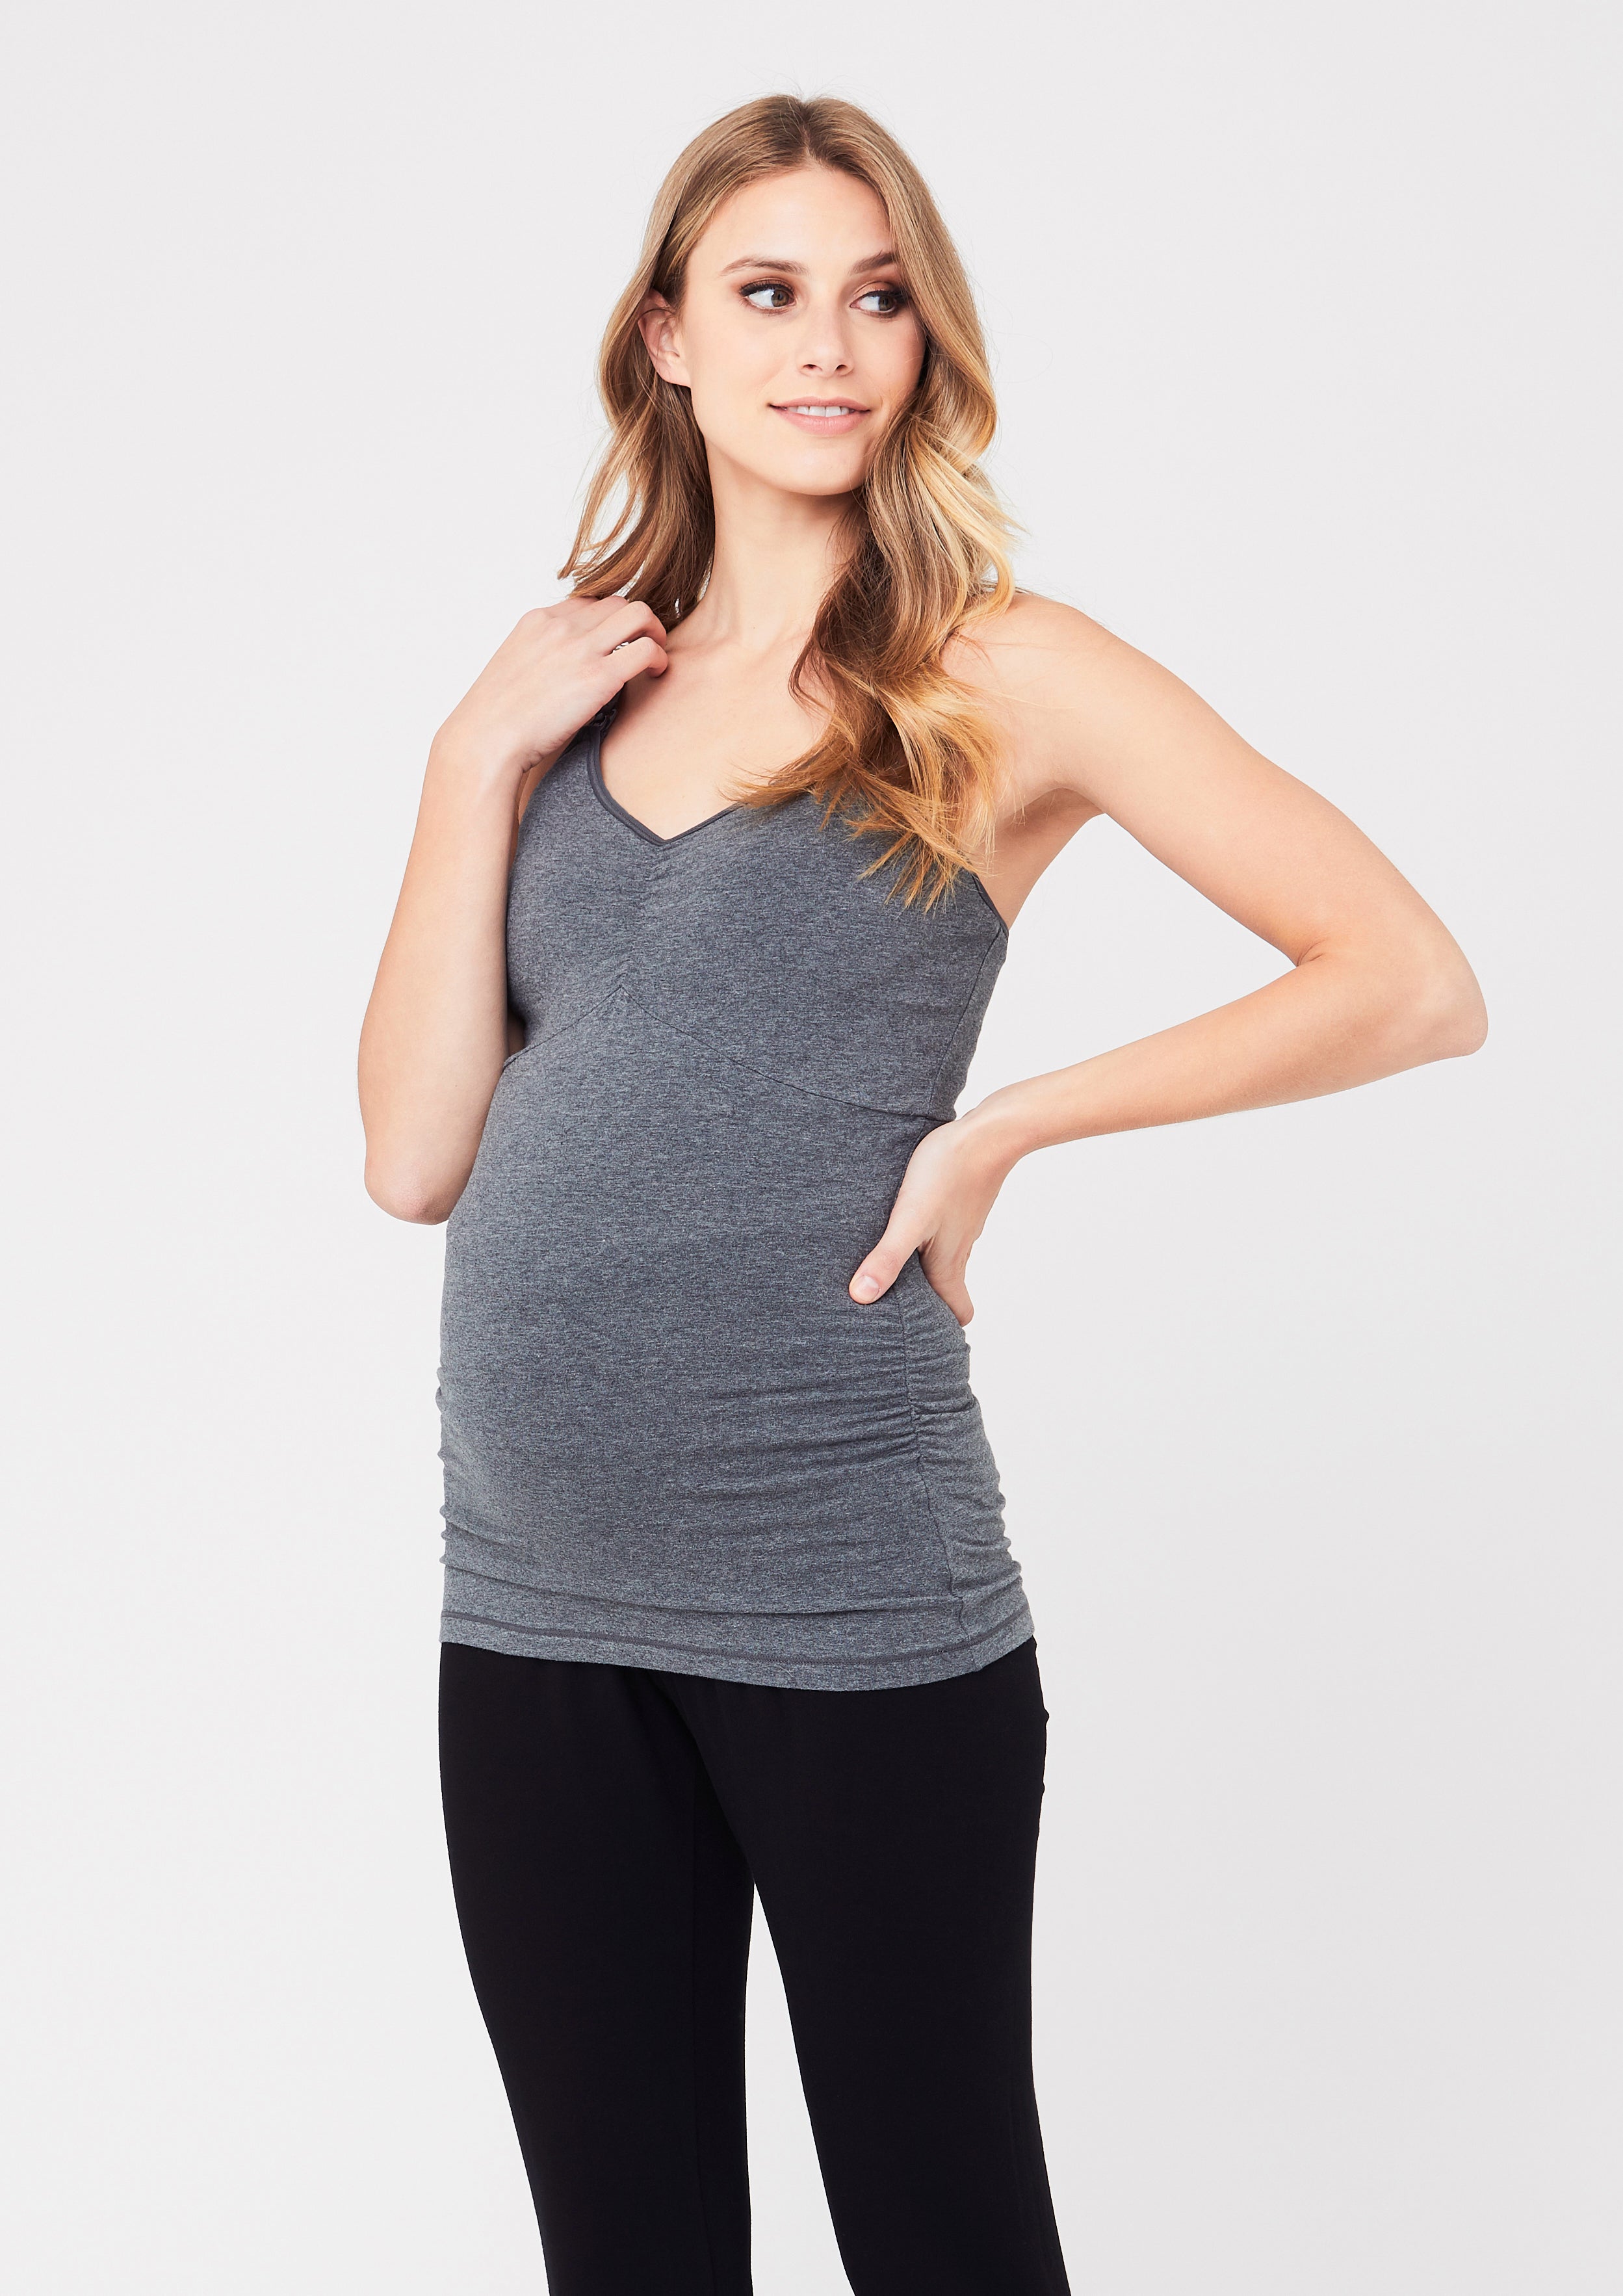 The Best Nursing Tanks You Can Buy on